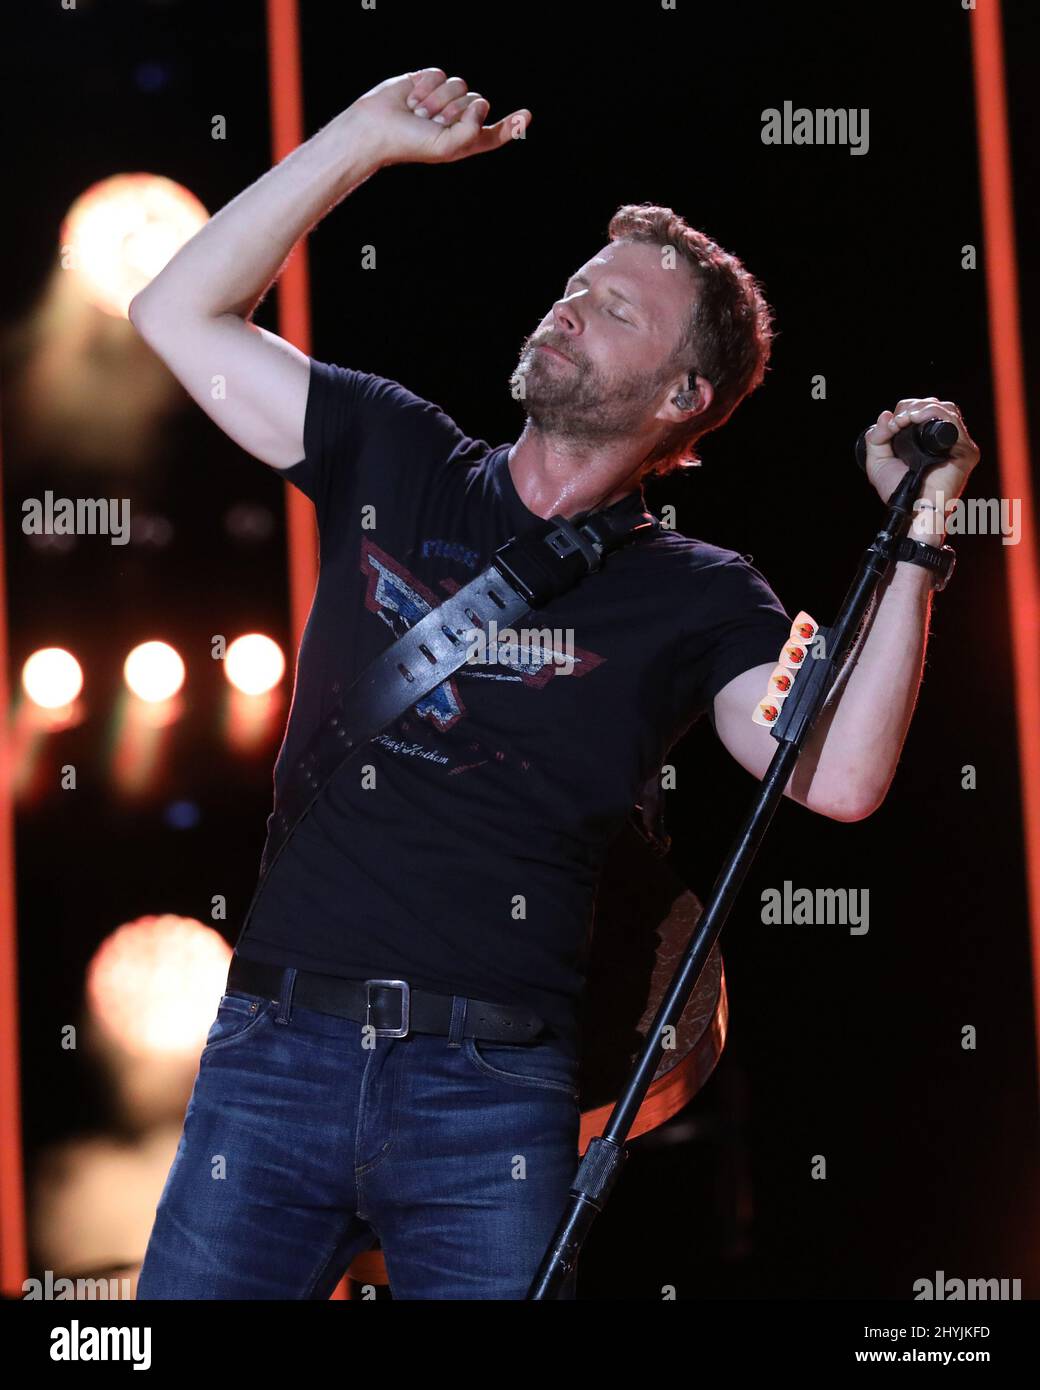 Dierks Bentley during the CMA Music Festival 2019 Stock Photo